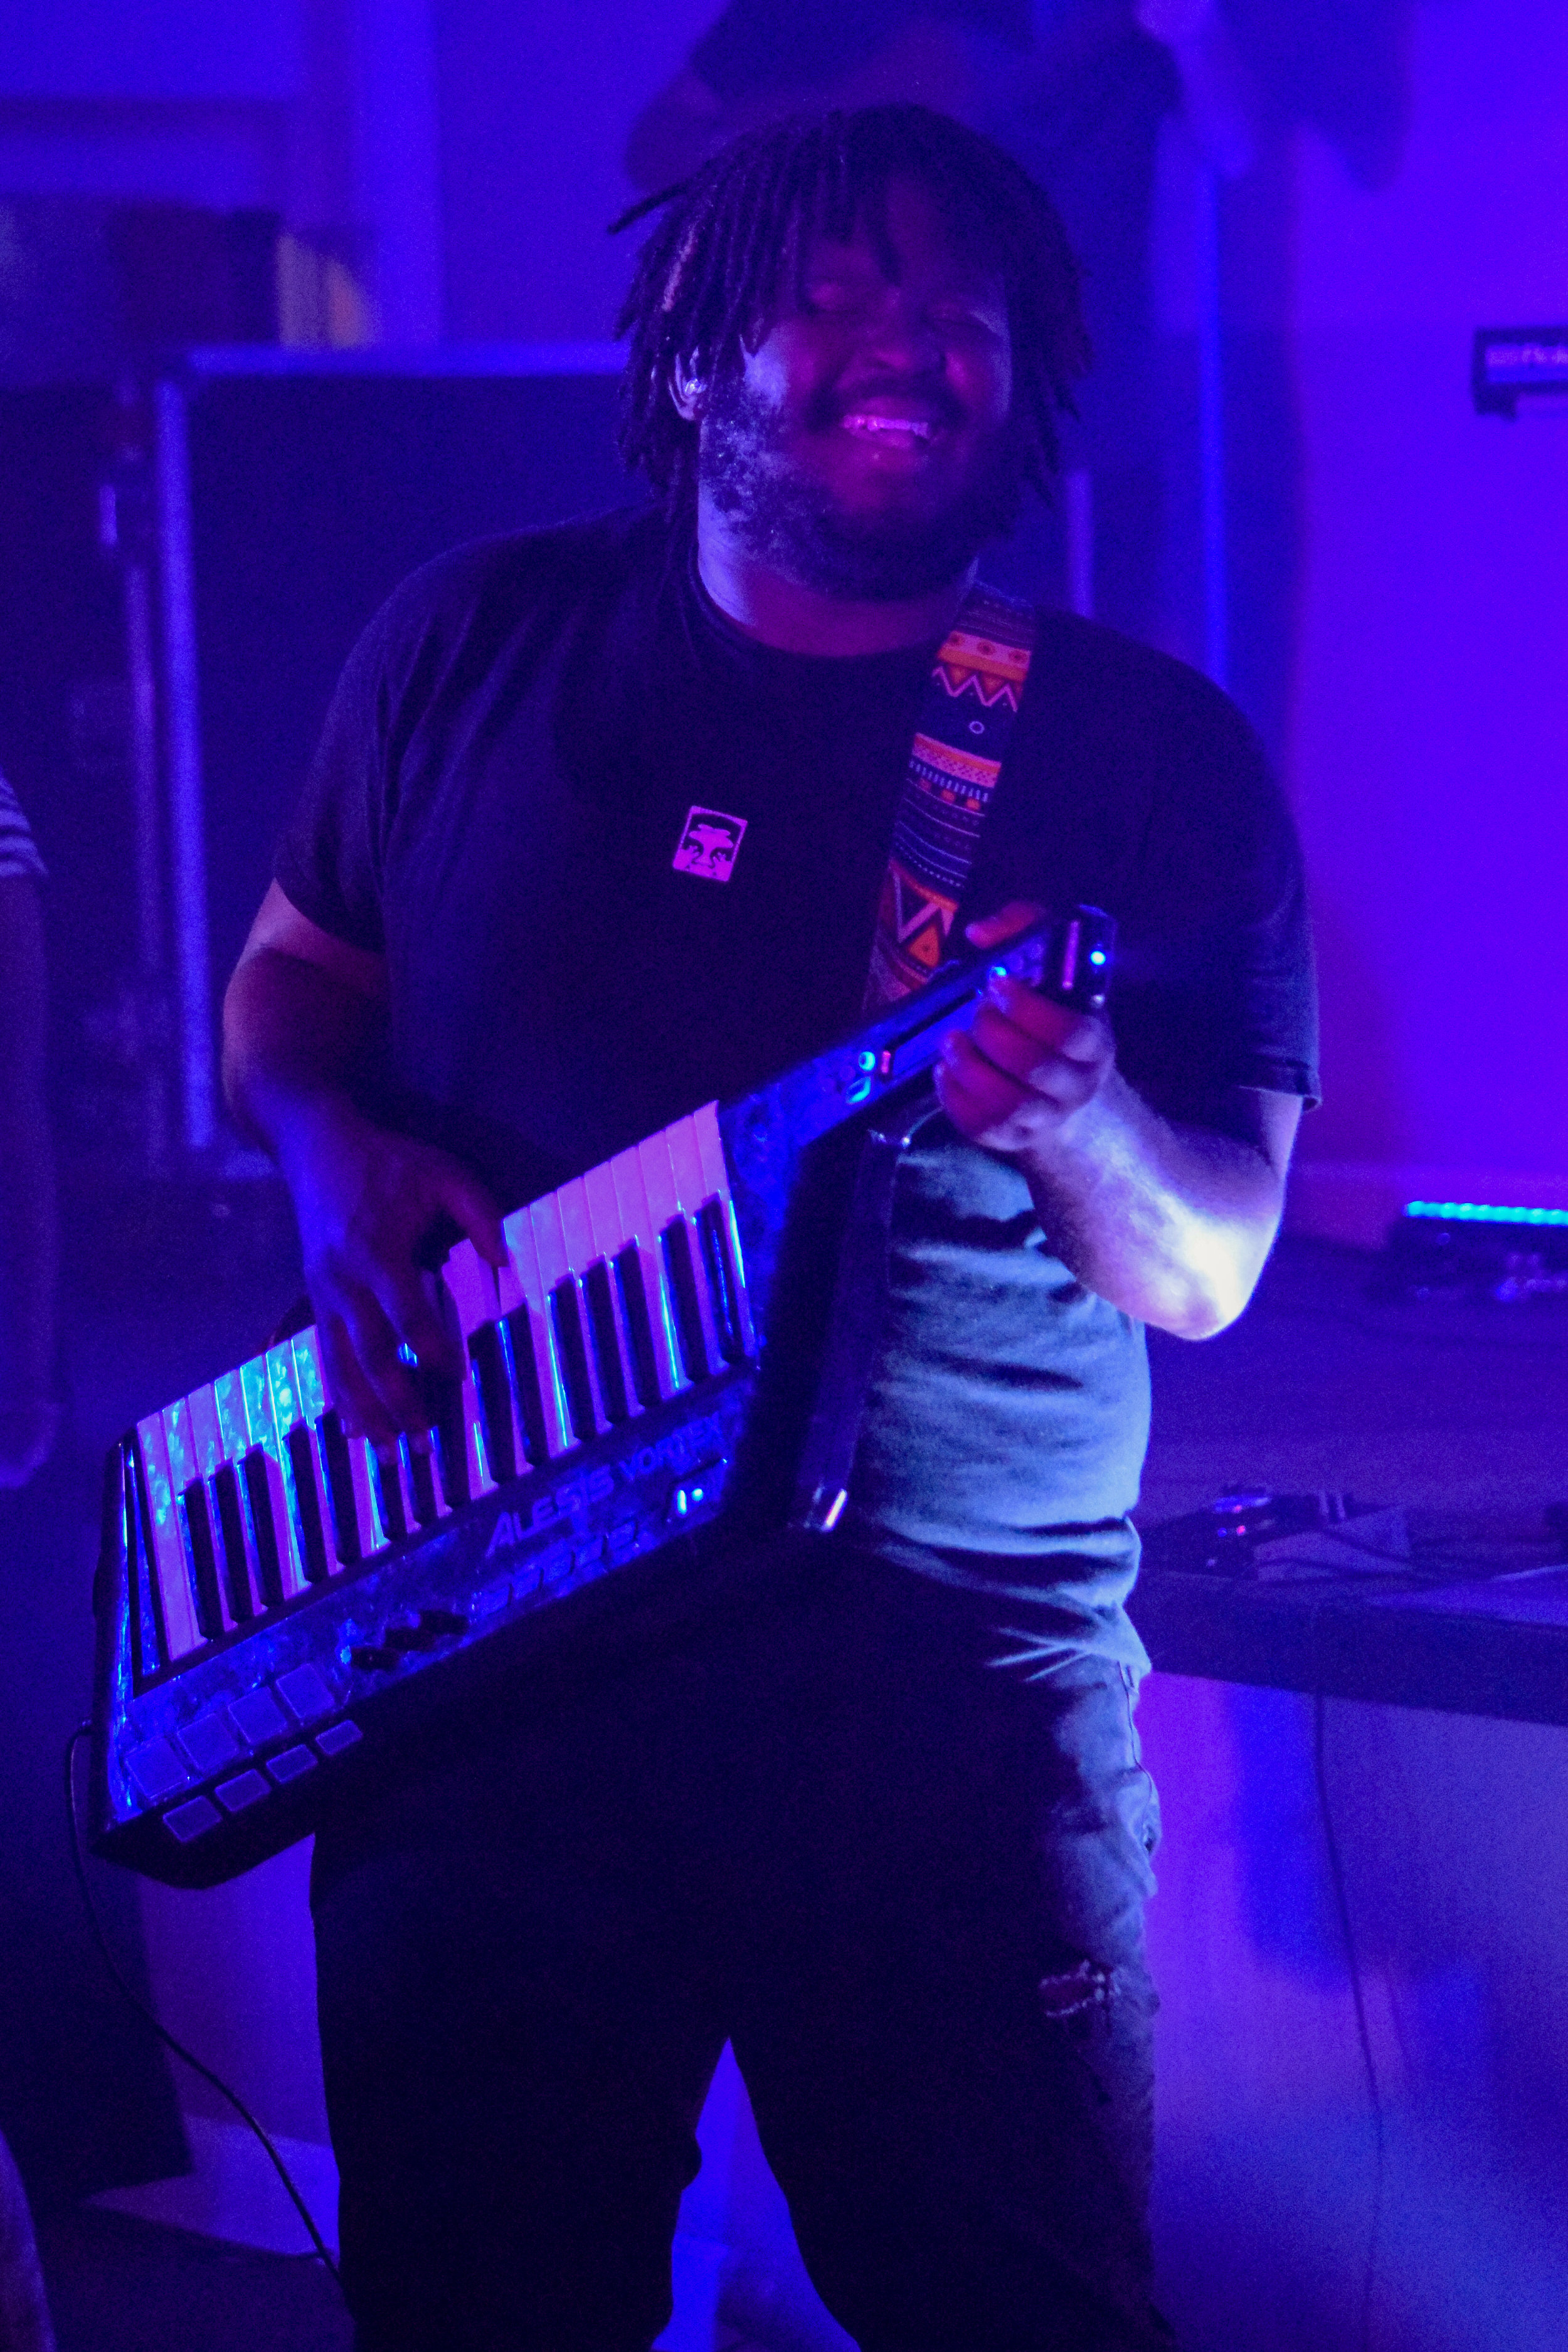 Perdue rocks it out on the keytar during the service.